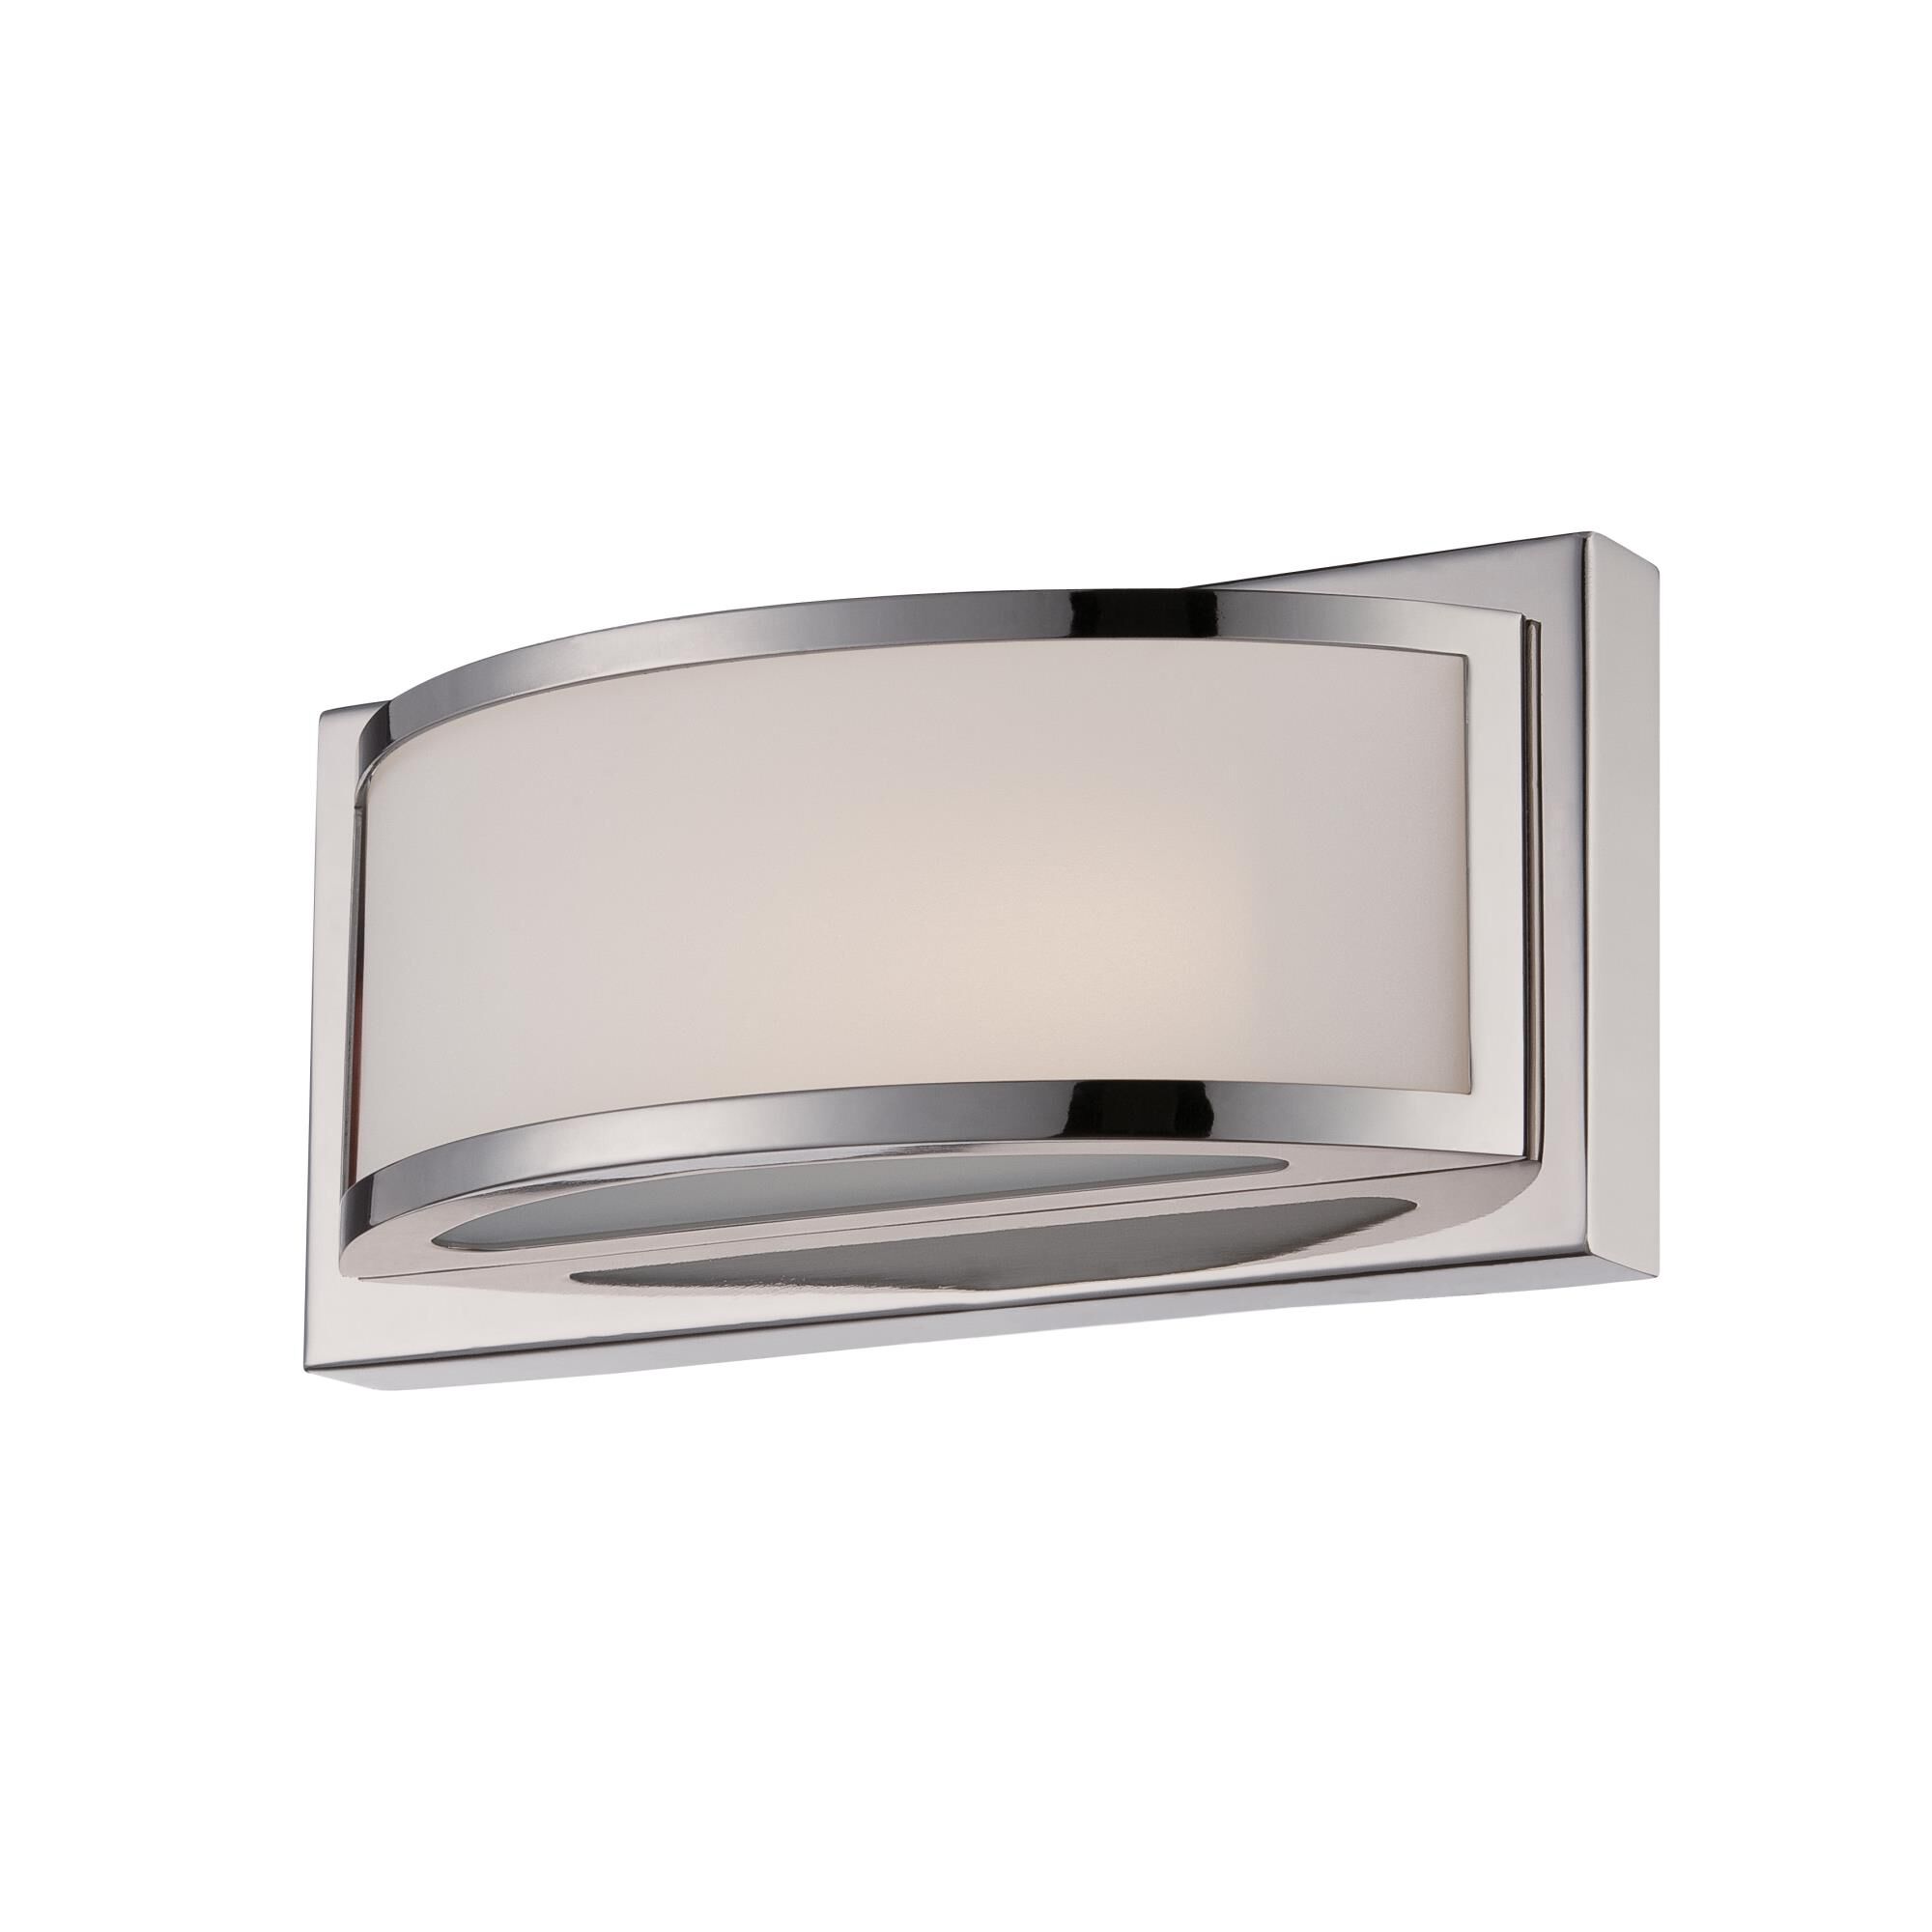 Photos - Chandelier / Lamp Nuvo Lighting Mercer 10 Inch LED Wall Sconce Mercer - 62/311 - Modern Cont